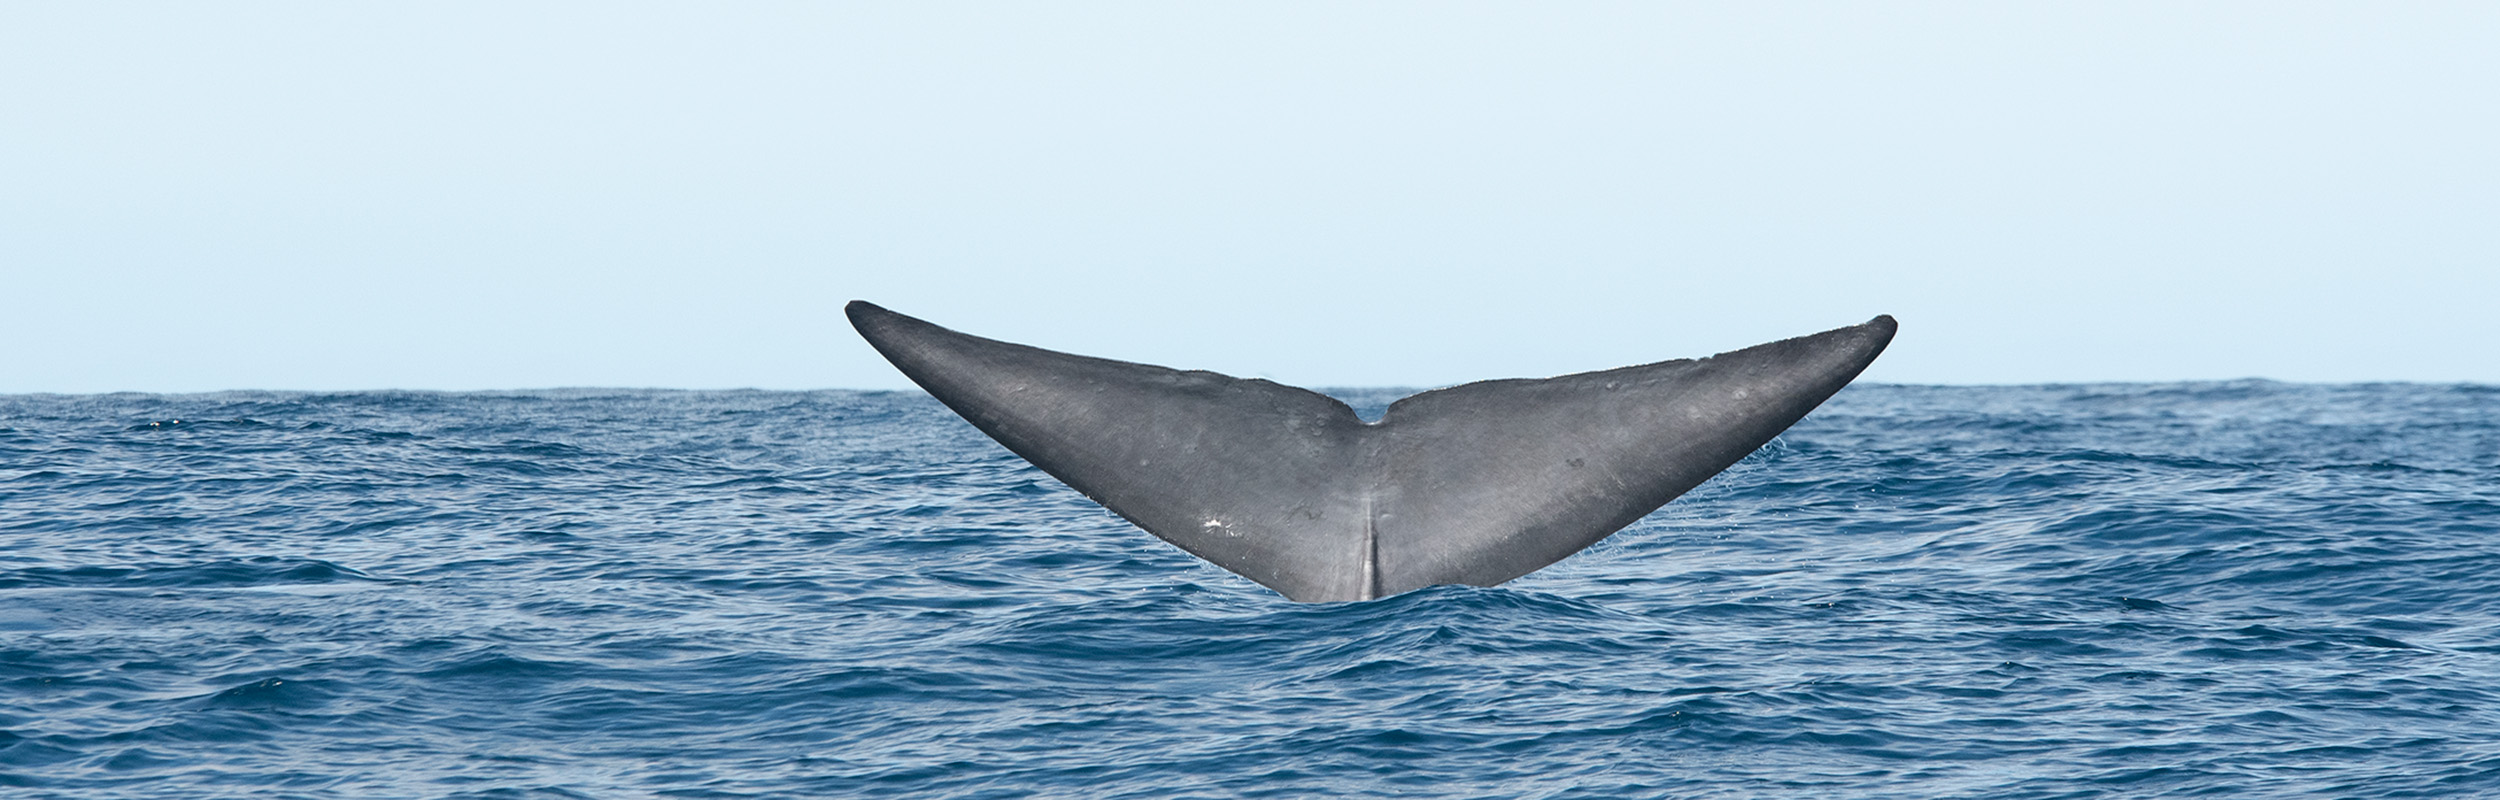 Humpback whale fact sheet - Azores Whales